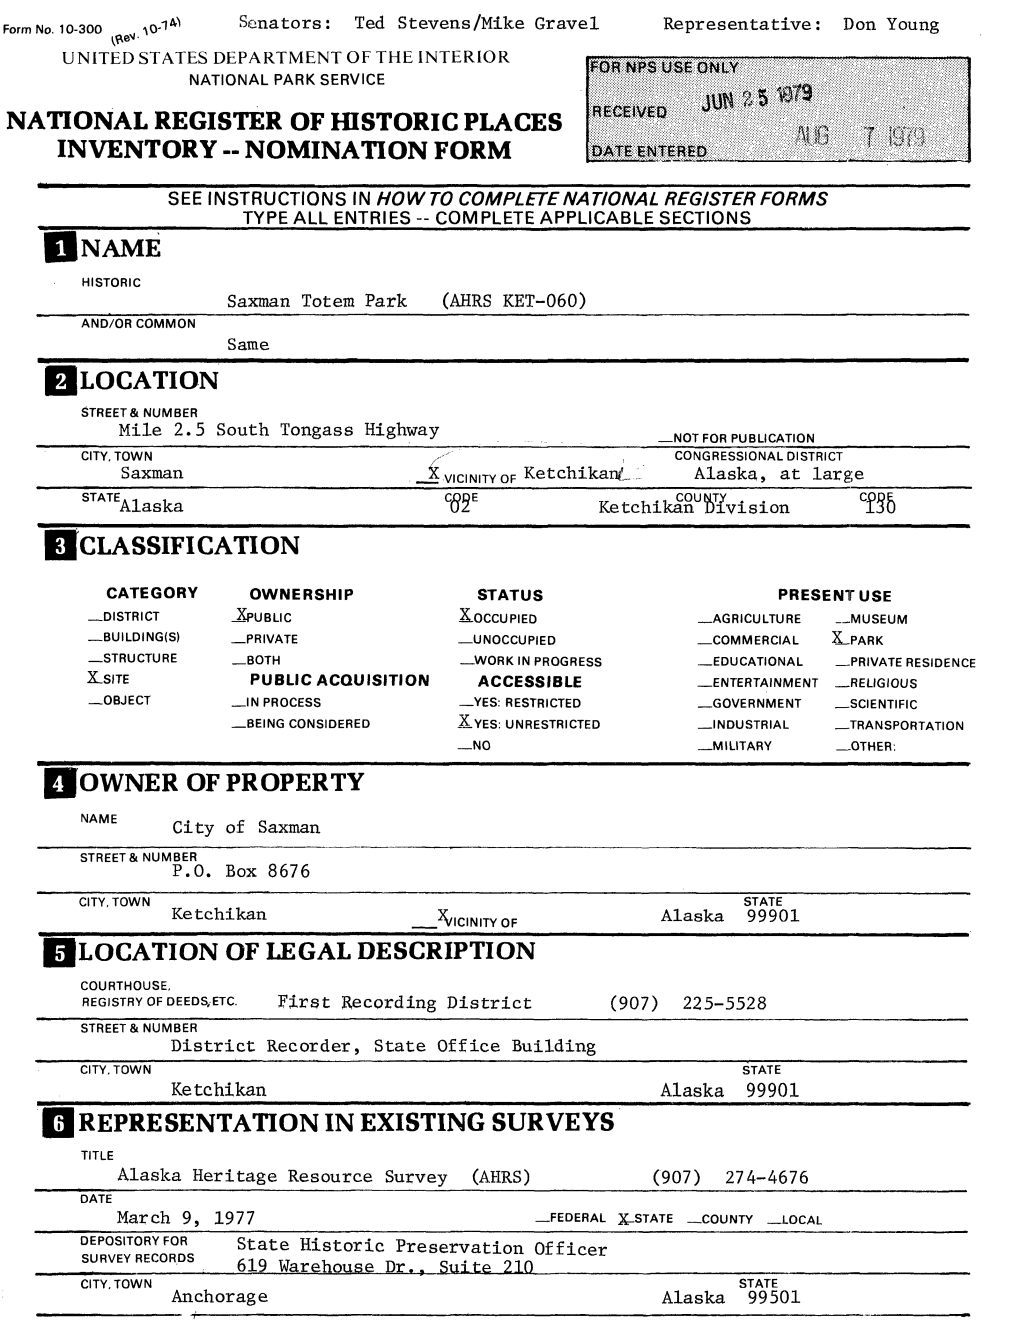 National Register of Historic Places Inventory -- Nomination Form Name Location Classification Owner of Property Location Of